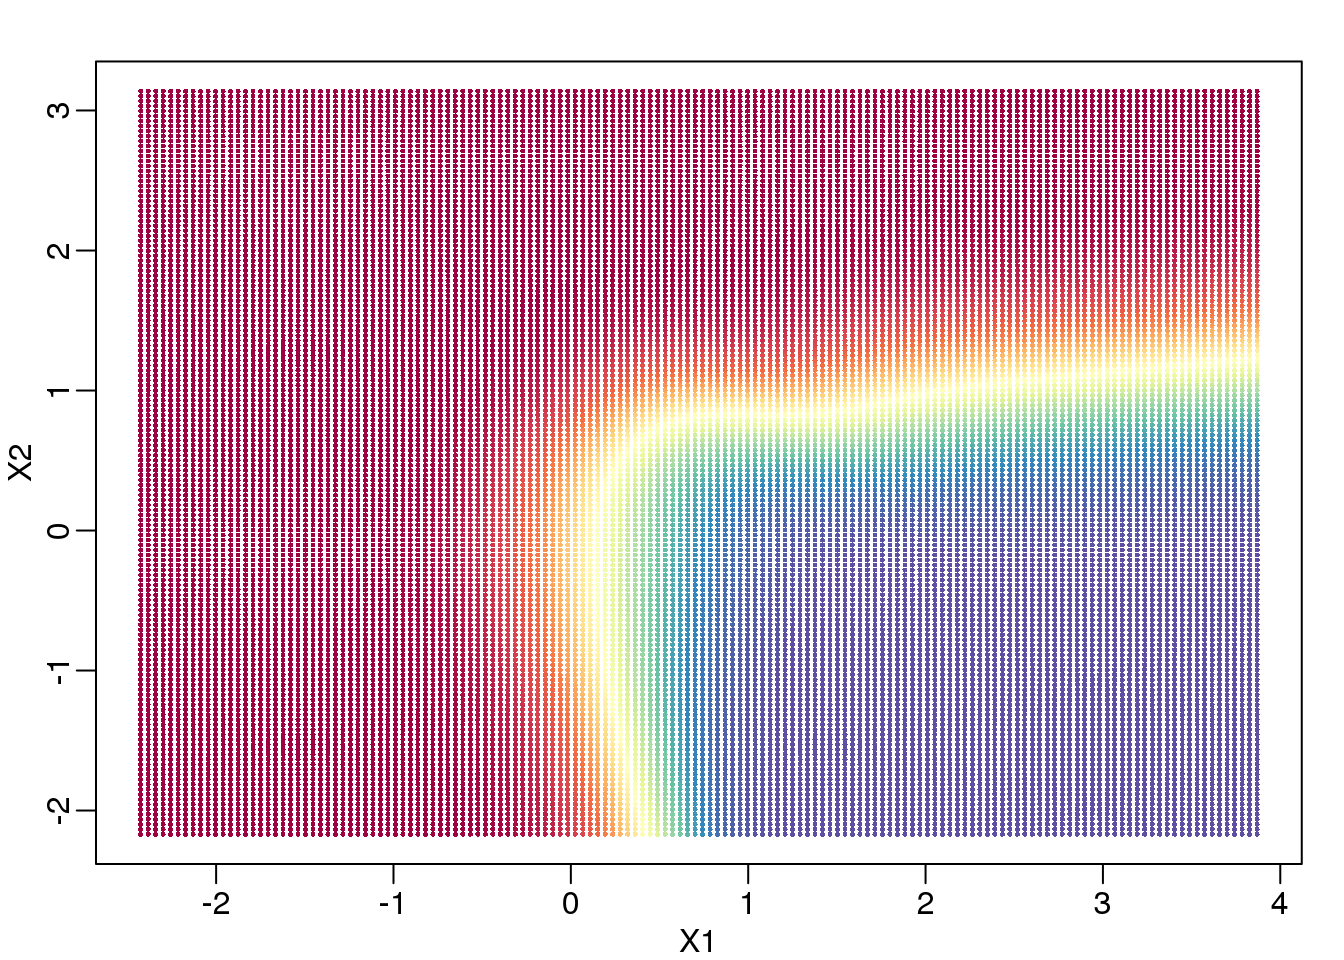 Probability of Y=1 as a function of X1 and X2. Red is close to 1, yellow close to 0.5, and blue close to 0.